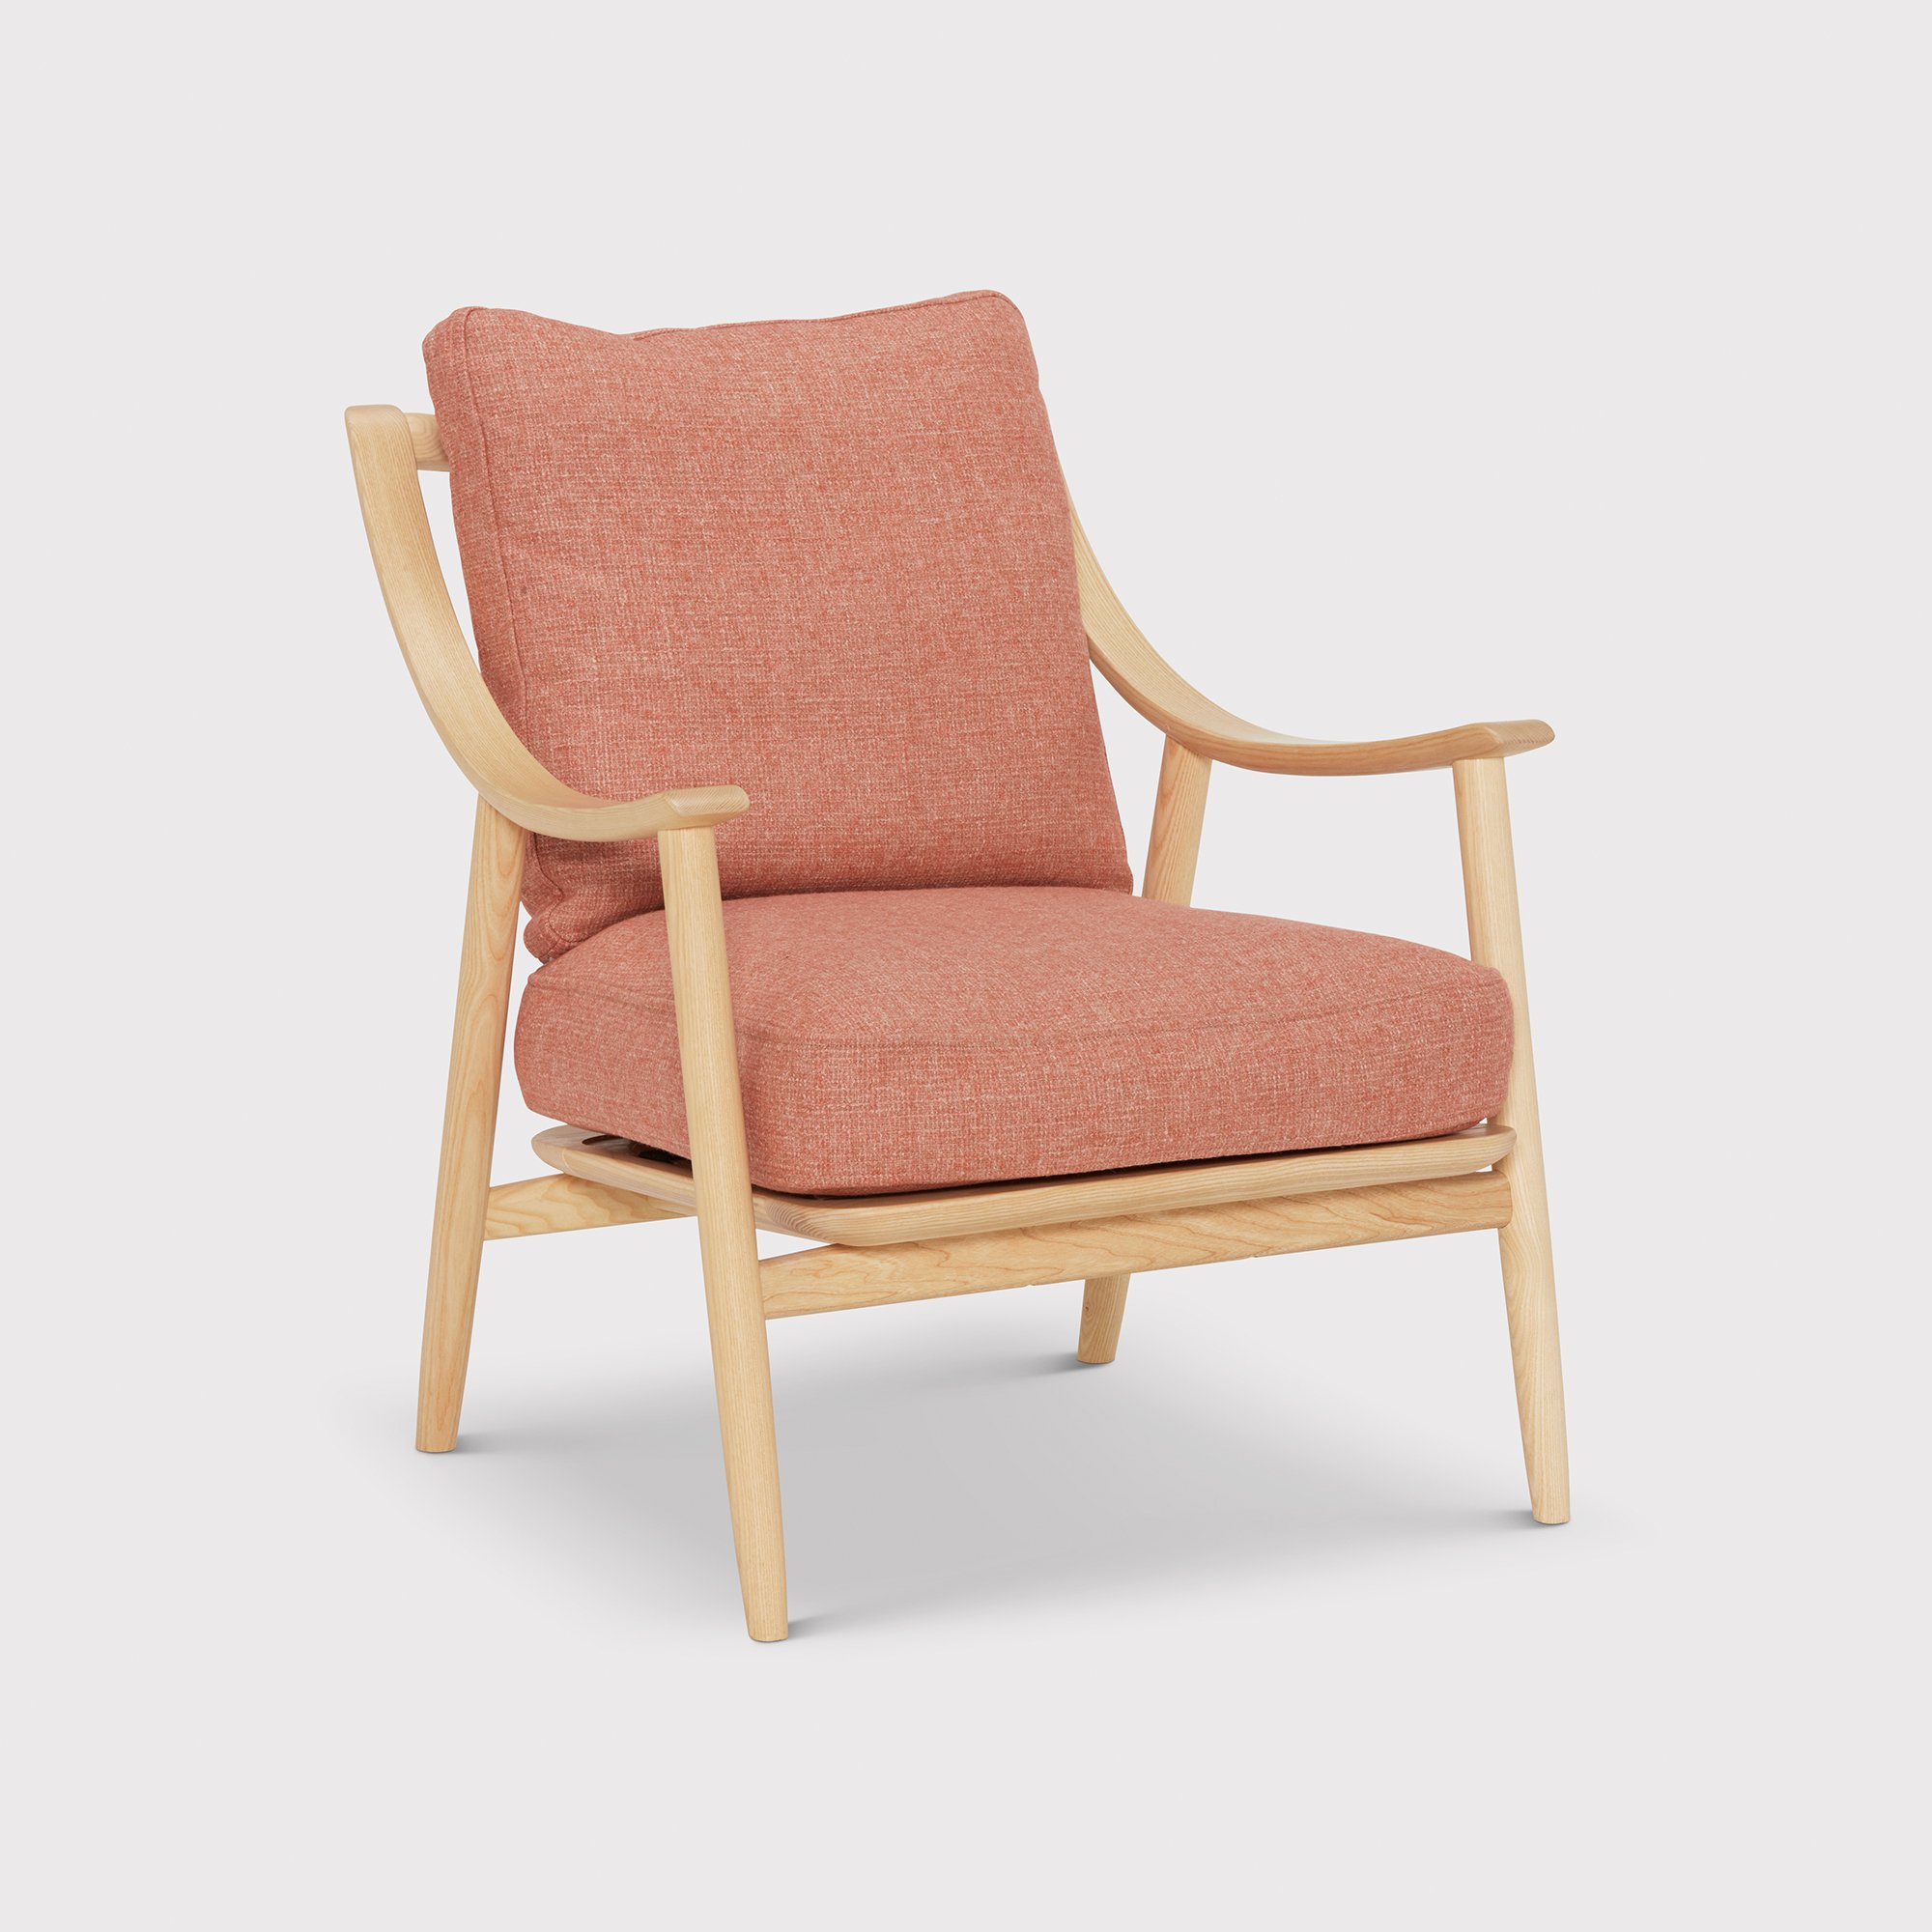 Ercol Marino Accent Chair, Pink Fabric | Barker & Stonehouse